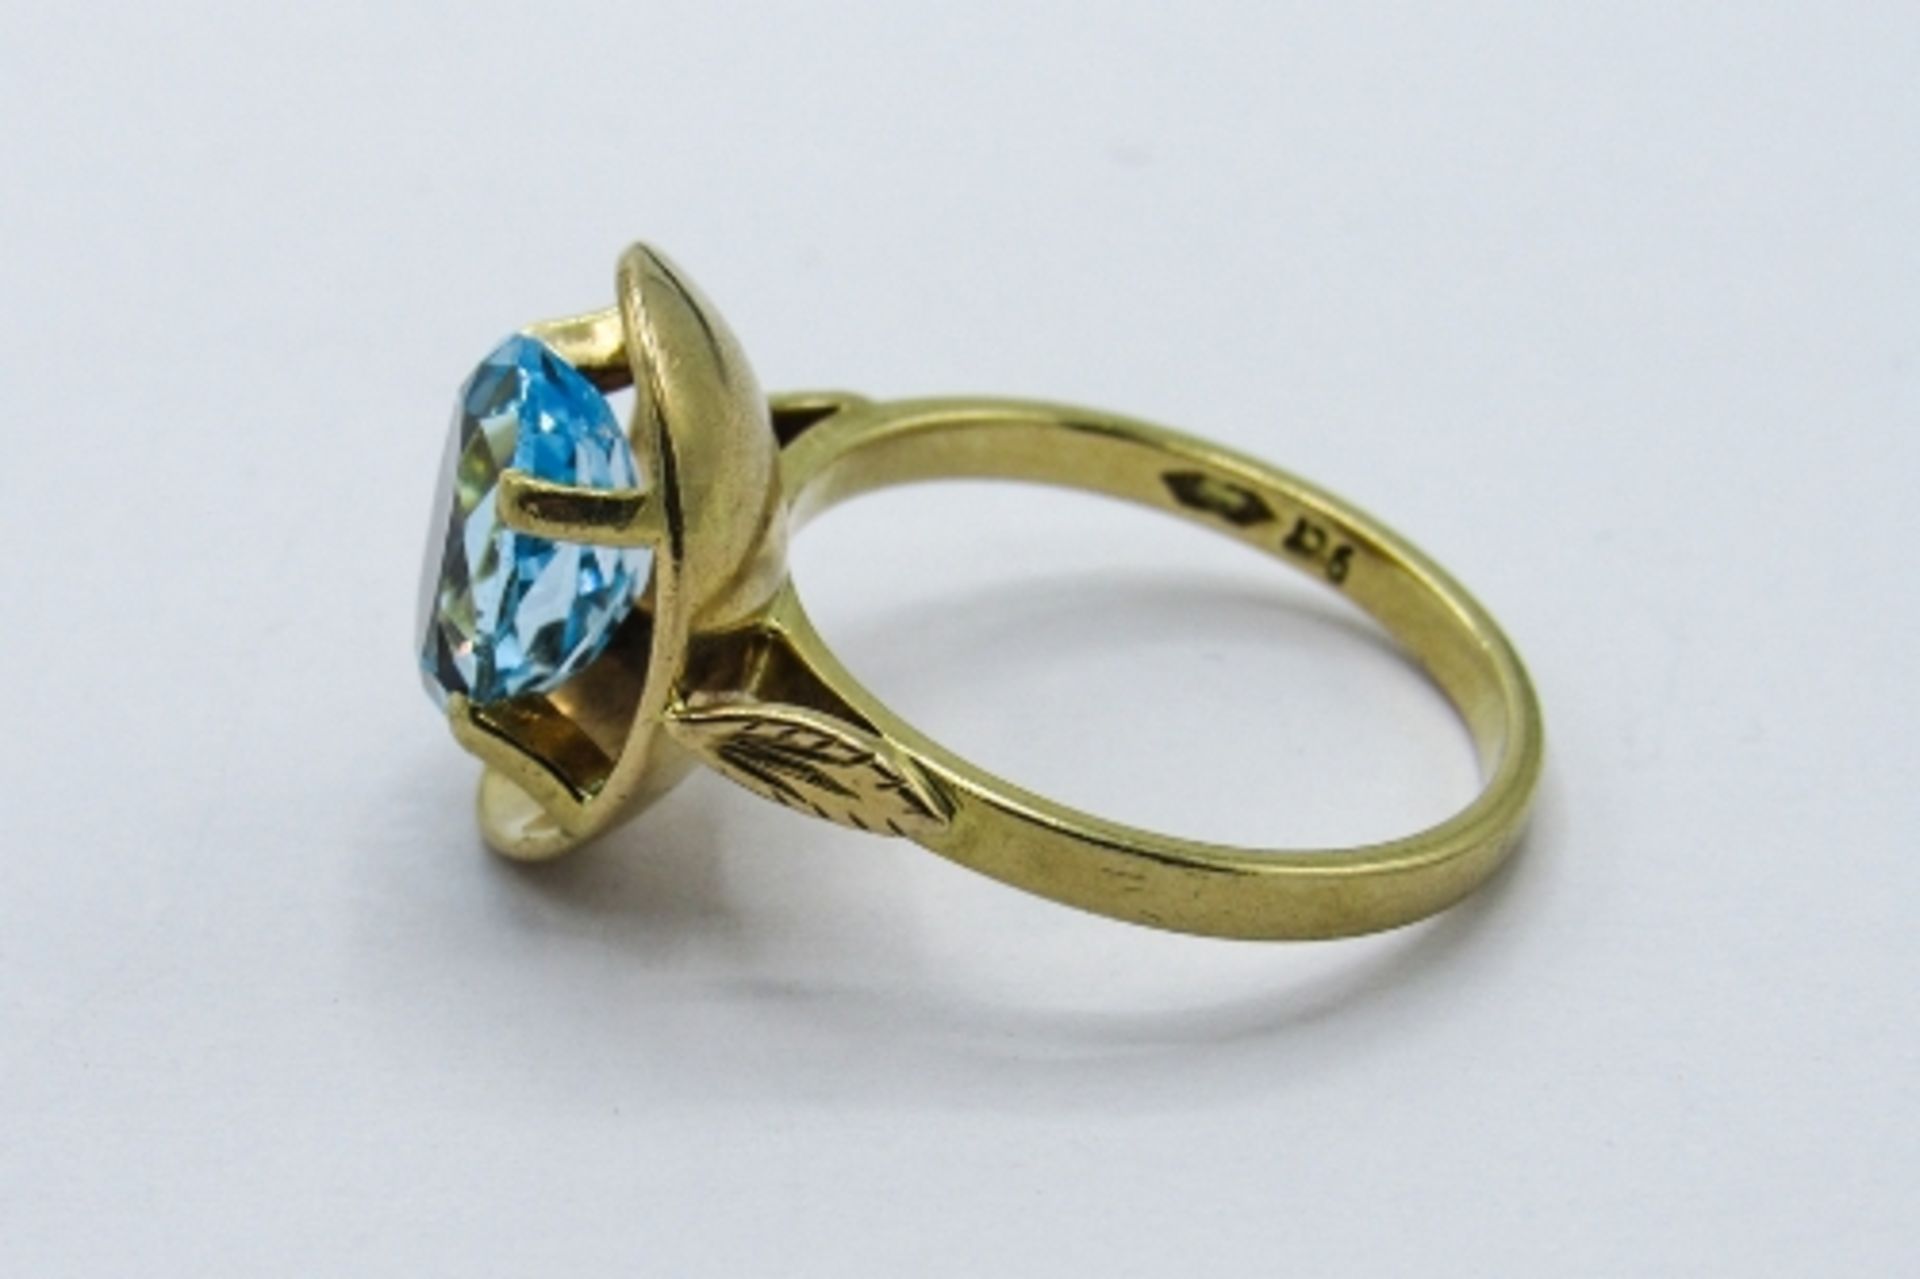 9ct gold topaz ring, weight 4.8gms, size Q. Estimate £150-170 - Image 2 of 4